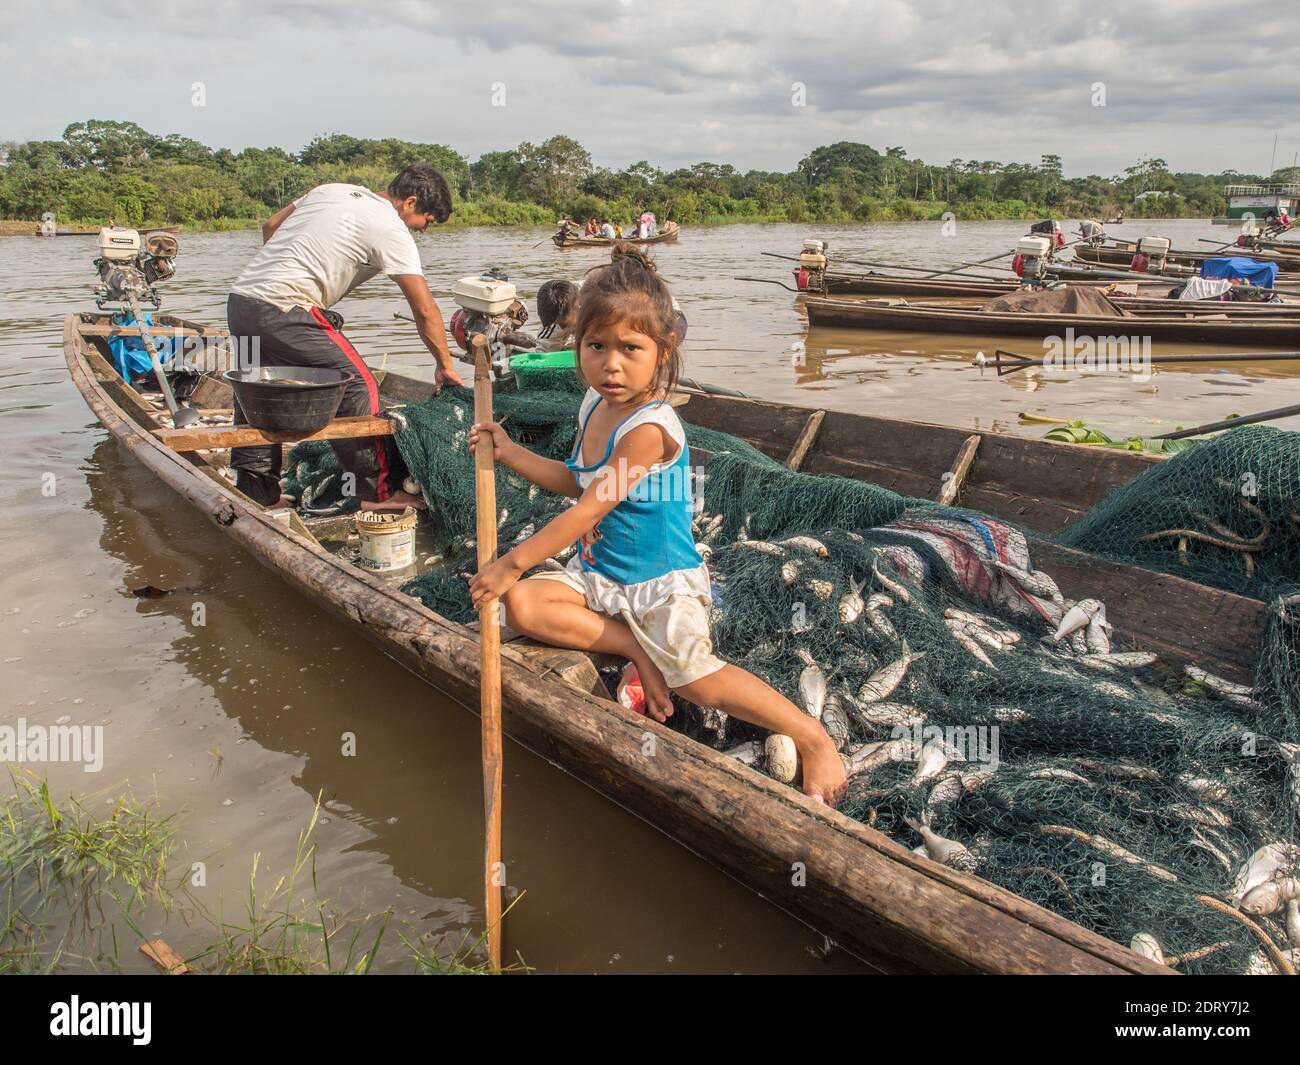 Amazon river, Peru- December 11, 2017: Small peruvian girl is  sitting on the wooden boat full of fishes. Stock Photo